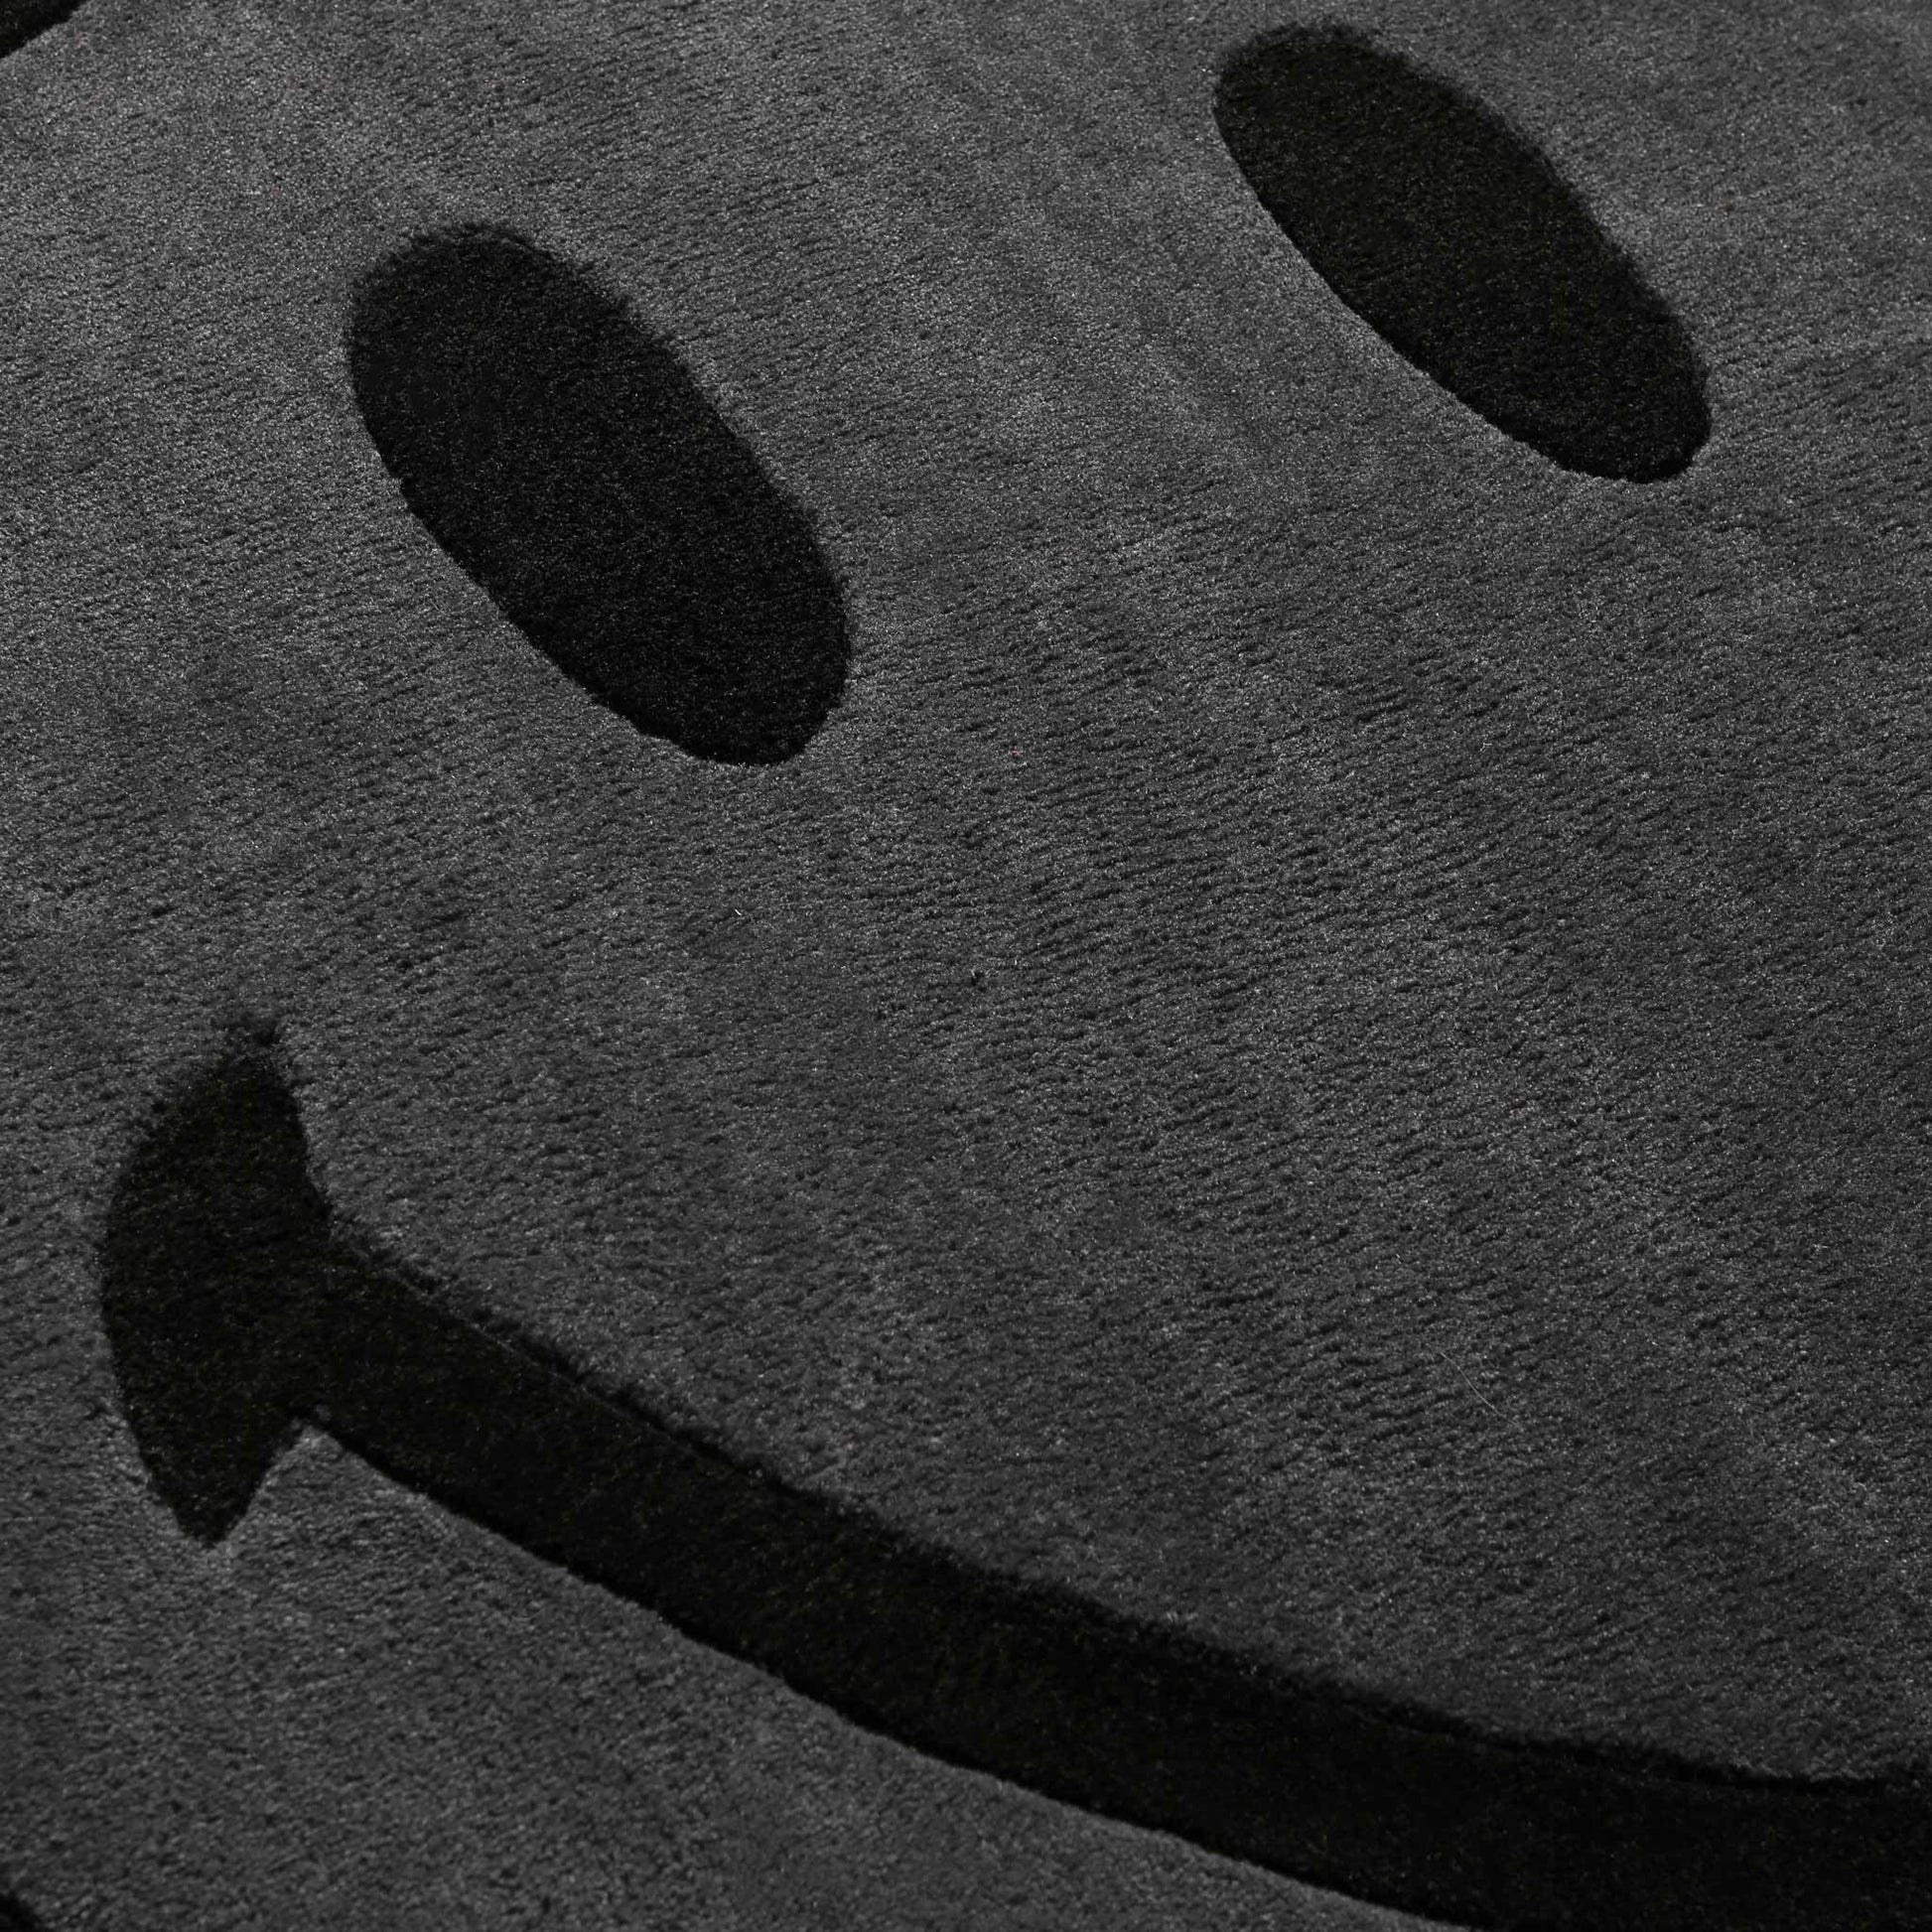 MARKET clothing brand SMILEY 6 FOOT MONOCHROME RUG. Find more homegoods and graphic tees at MarketStudios.com. Formally Chinatown Market. 